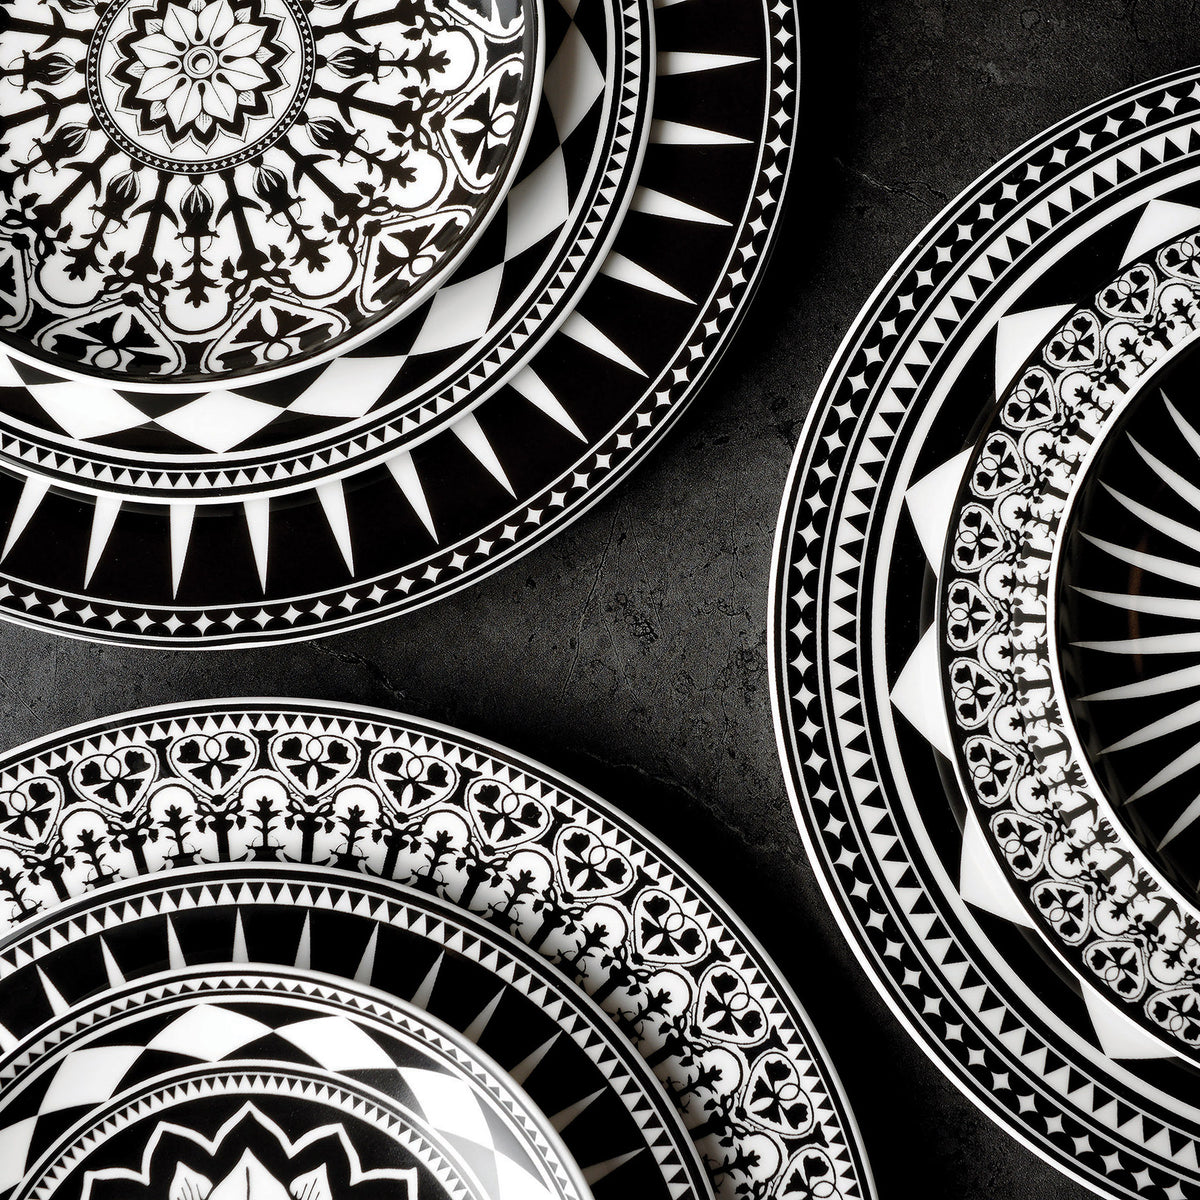 Black and white Casablanca Small Plates by Caskata Artisanal Home, with intricate geometric and floral patterns, arranged on a dark surface, showcasing heirloom-quality dinnerware.